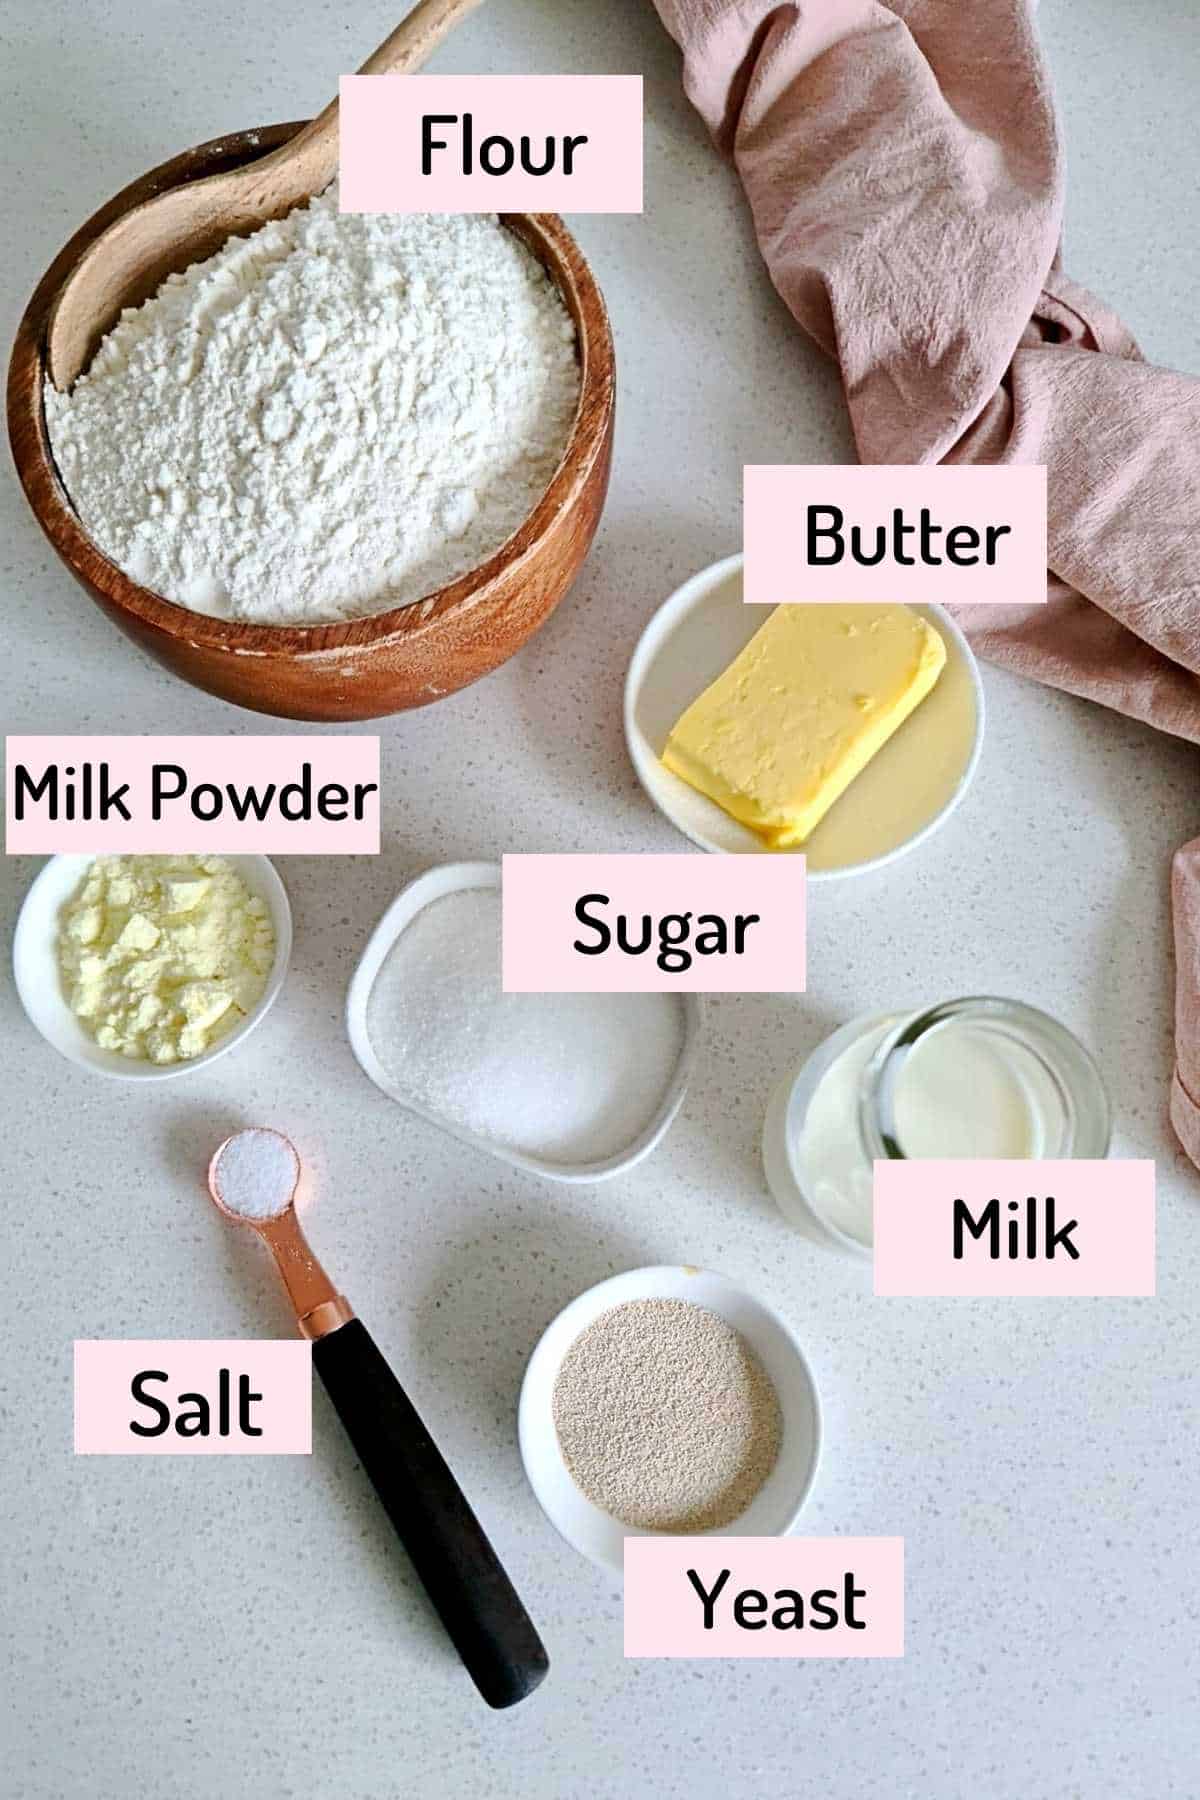 Ingredients needed to make bread dough